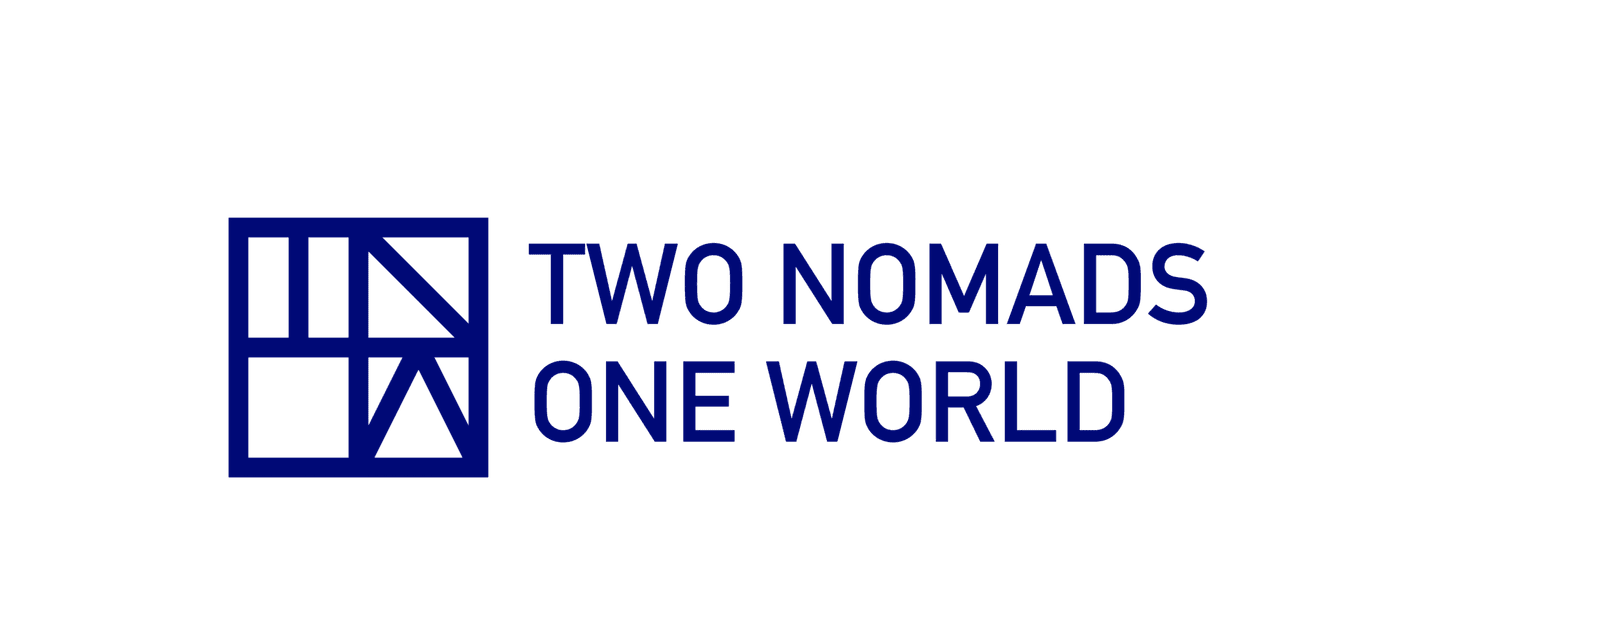 Two Nomads One World | Where To Travel As A Couple? 👫✈️ | 2N1W